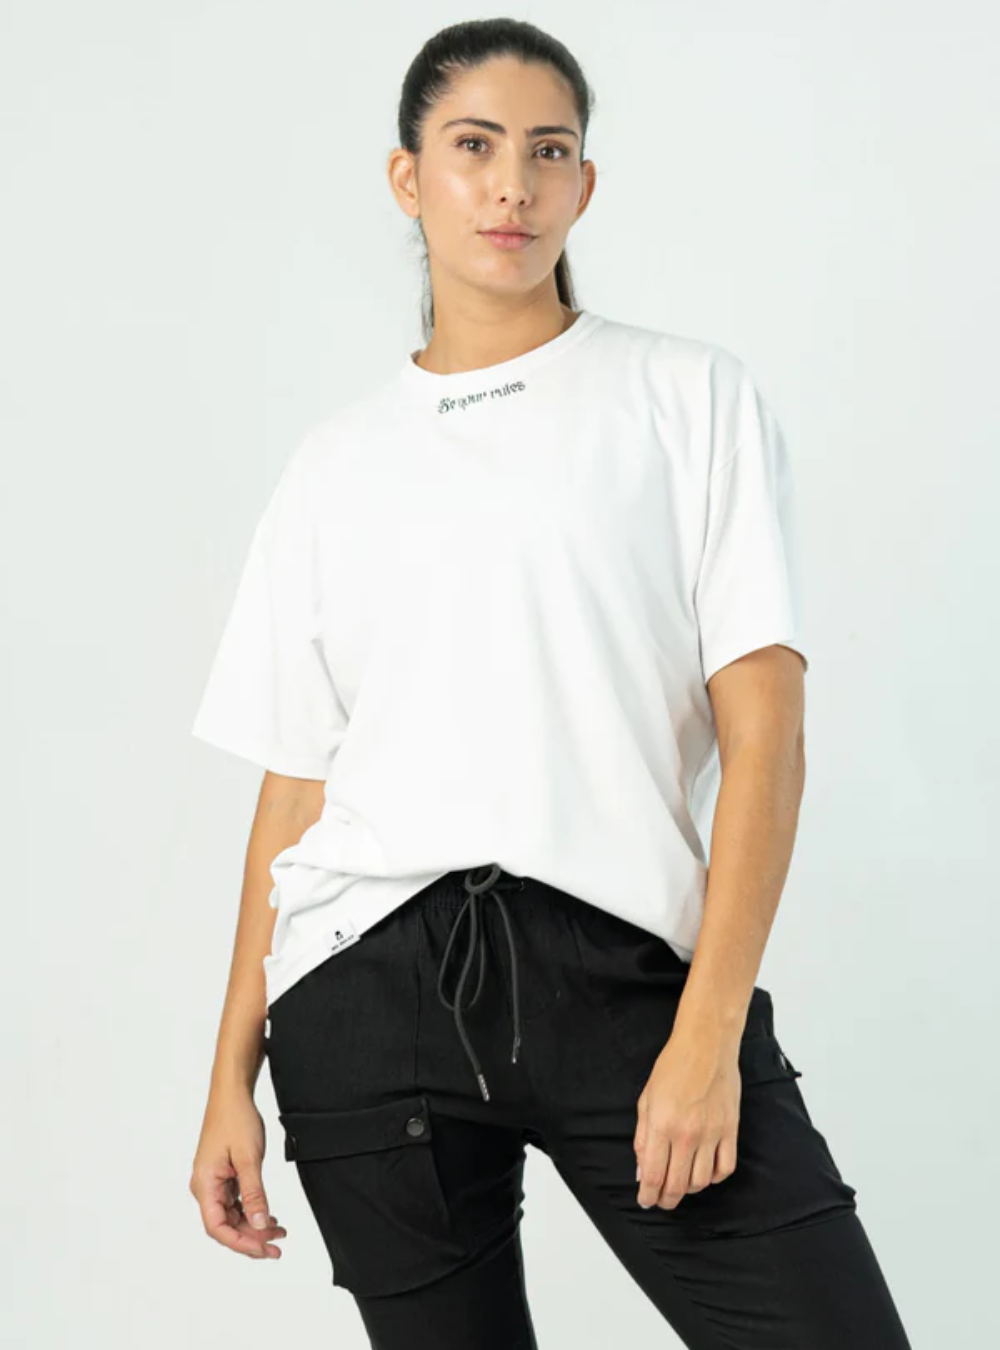 WHITE LOOSE FIT UNISEX 'BE YOUR RULES' PRINTED T-SHIRT